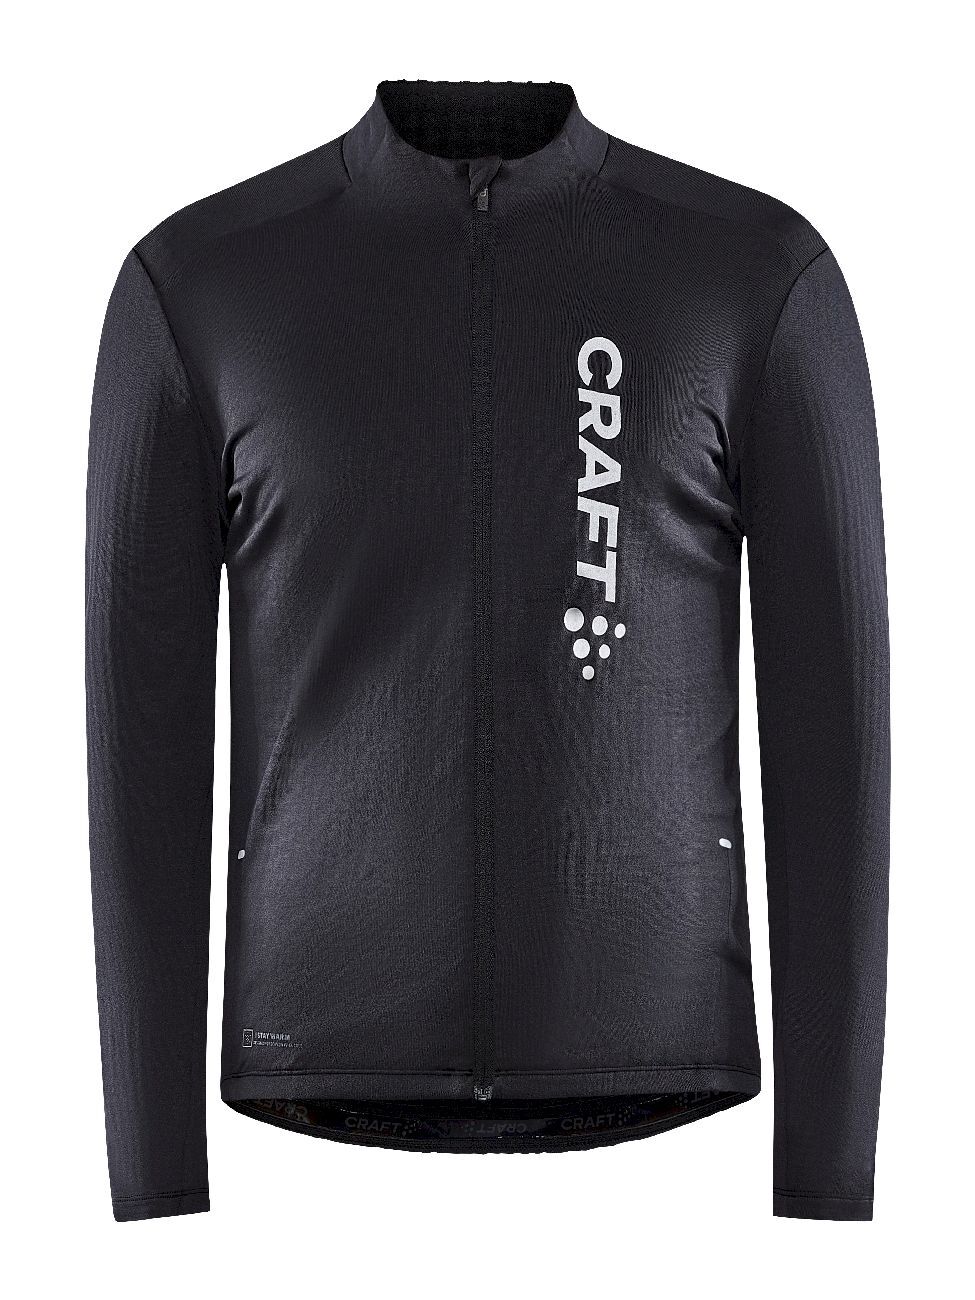 Craft Core Bike SubZ LS Jersey - Maillot ciclismo - Hombre